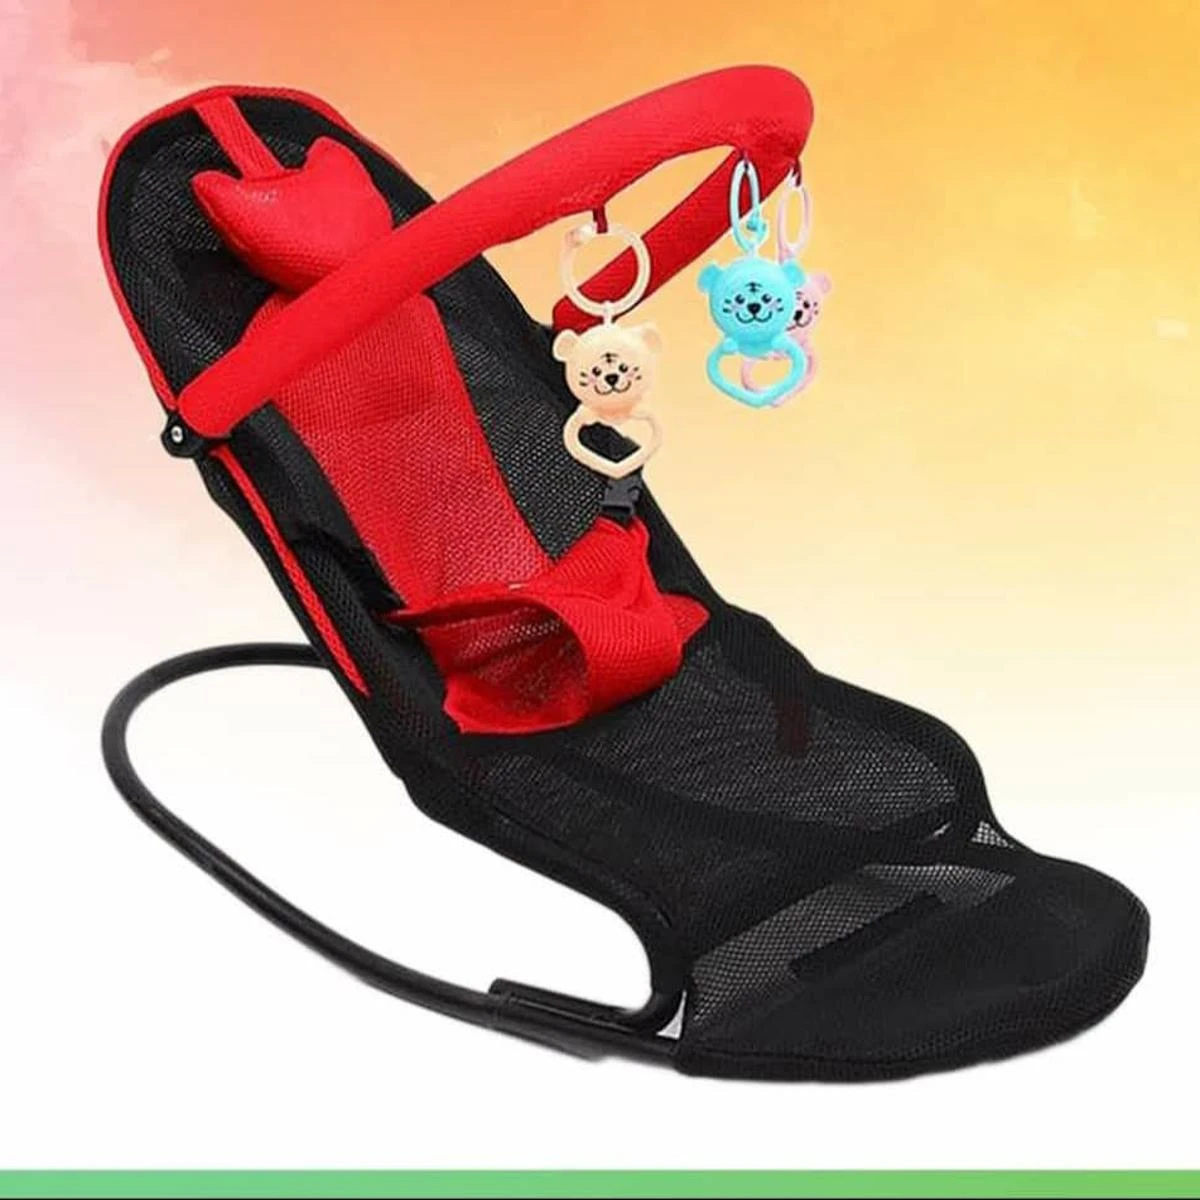 Multi functional Premium Baby Rocking Chair with Adjustable Angle and Safety Belt